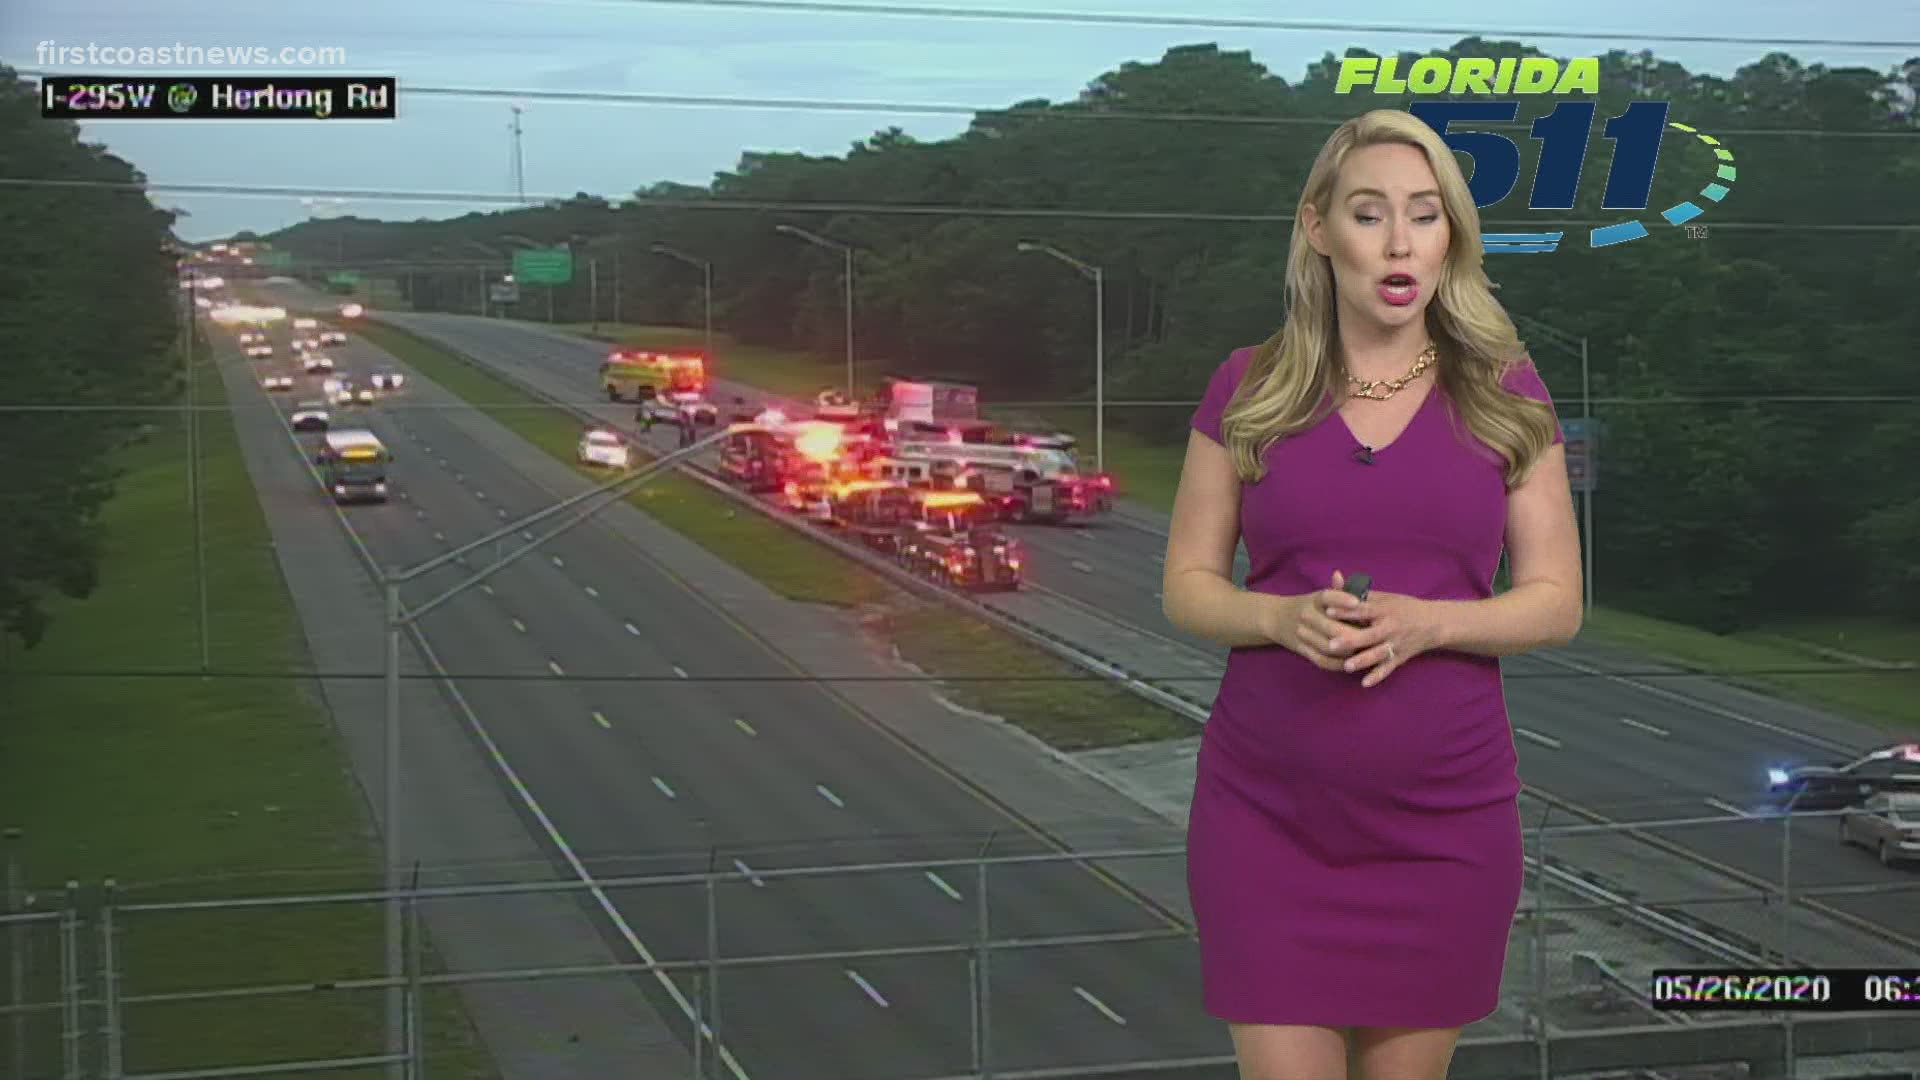 Northbound lanes of I-295 were blocked Tuesday morning due to a vehicle fire.